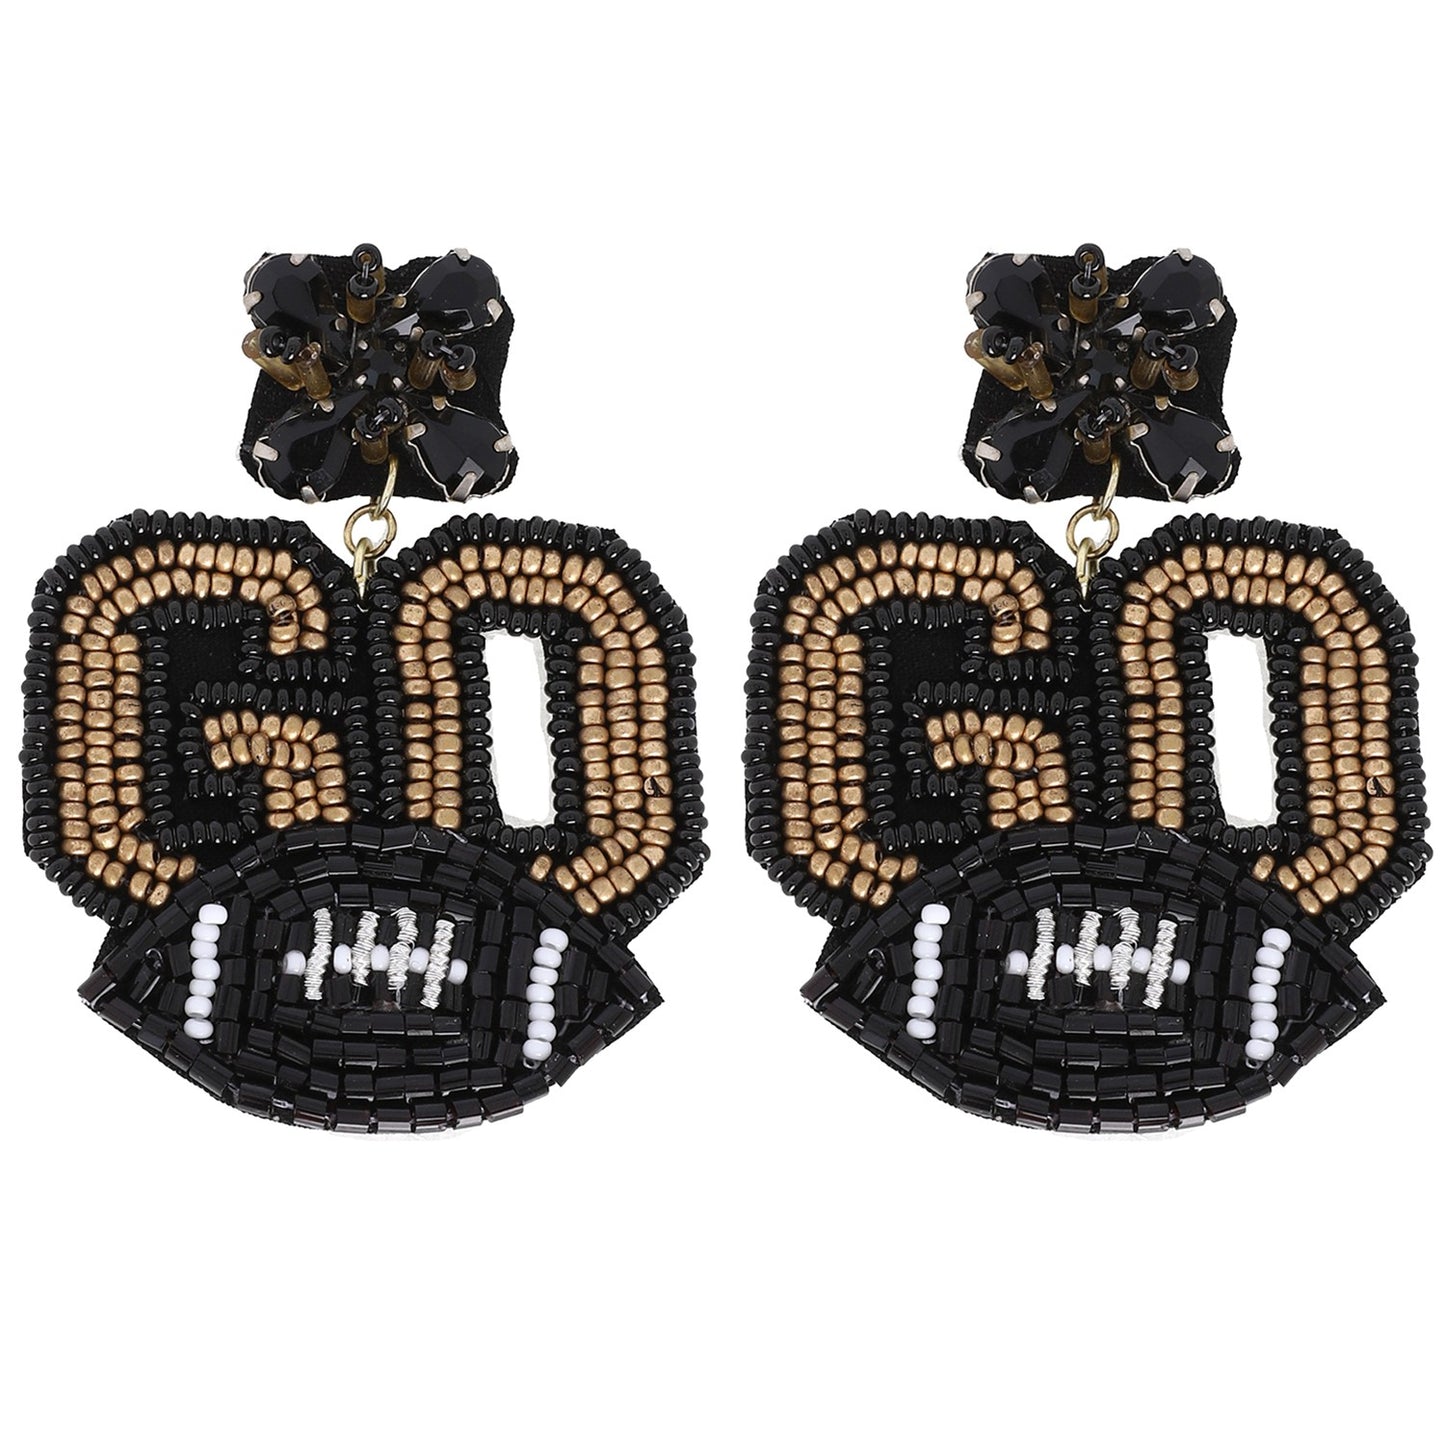 "Go Black and Gold" Earrings